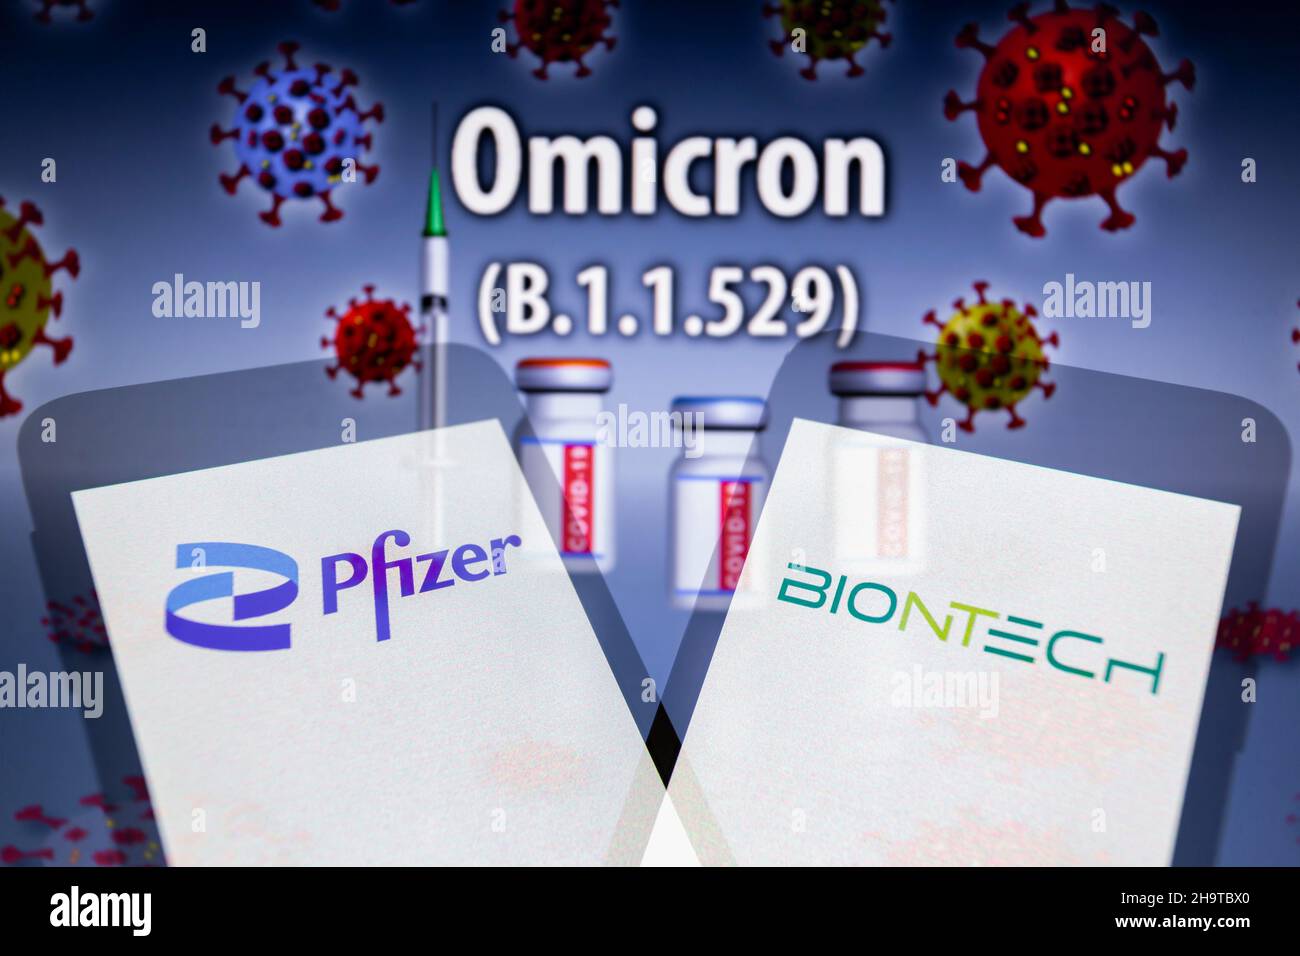 Asuncion, Paraguay. 8th Dec, 2021. Illustration: In-camera multiple exposure image shows logos of Pfizer and BioNTech on smartphone in front of the designation ''Omicron (B.1.1.529)'' and visual representation of virus, medical syringe and ampoules labeled COVID-19. Pfizer Inc. (NYSE: PFE) and BioNTech SE (Nasdaq: BNTX) today announced results from an initial laboratory study demonstrating that serum antibodies induced by the Pfizer-BioNTech COVID-19 vaccine (BNT162b2) neutralize the SARS-CoV-2 Omicron variant after three doses. (Credit Image: © Andre M. Chang/ZUMA Press Wire) Stock Photo